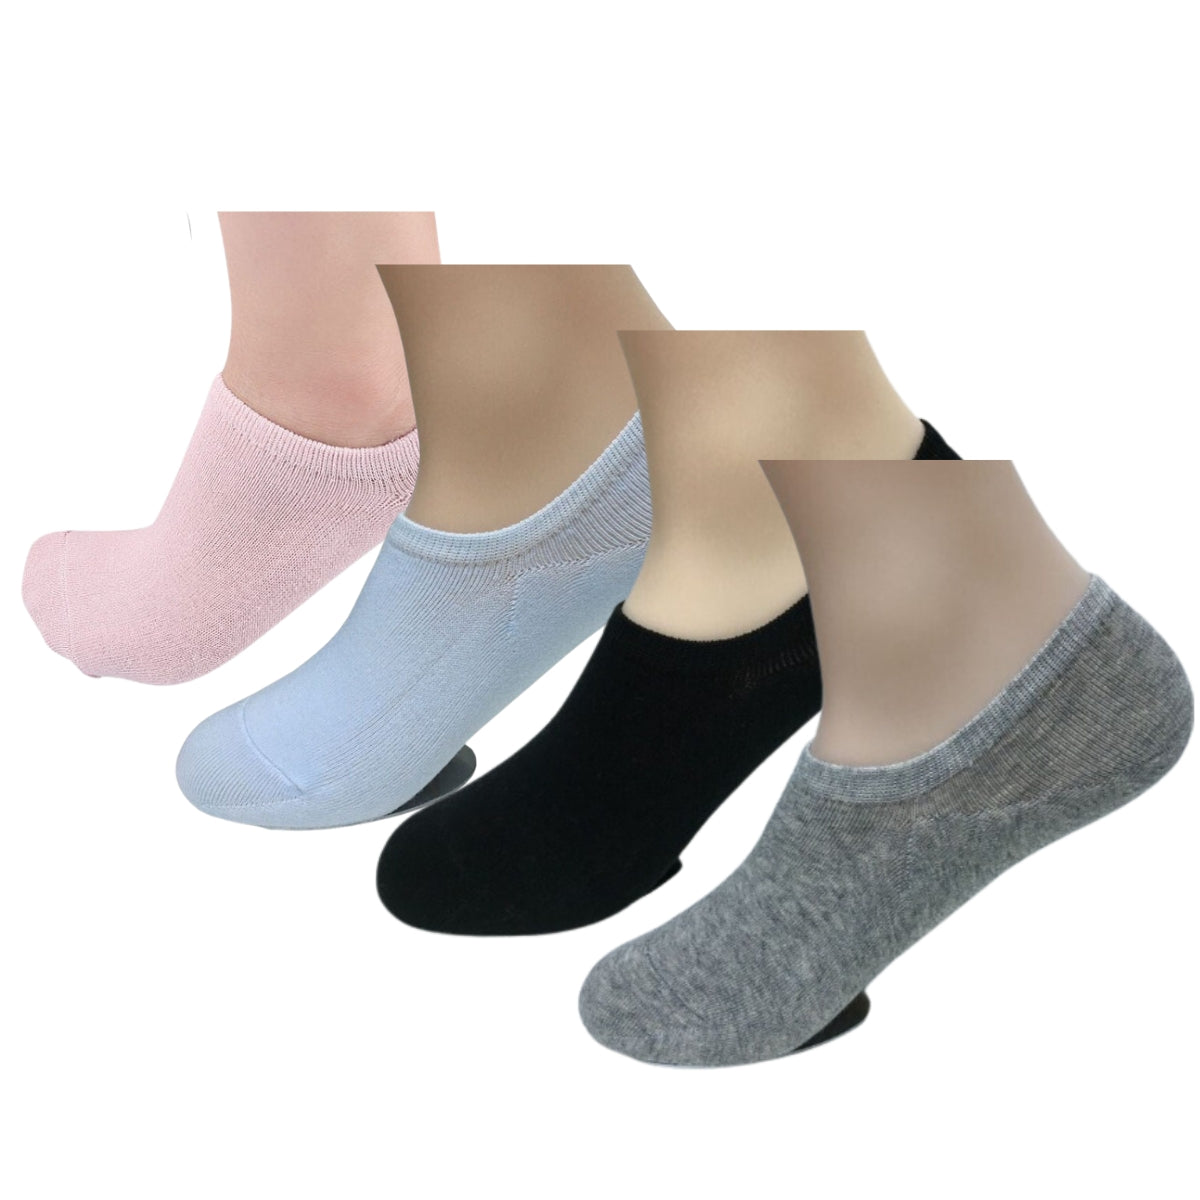 calcetines invisibles antiderrapantes silicon (12 pares)